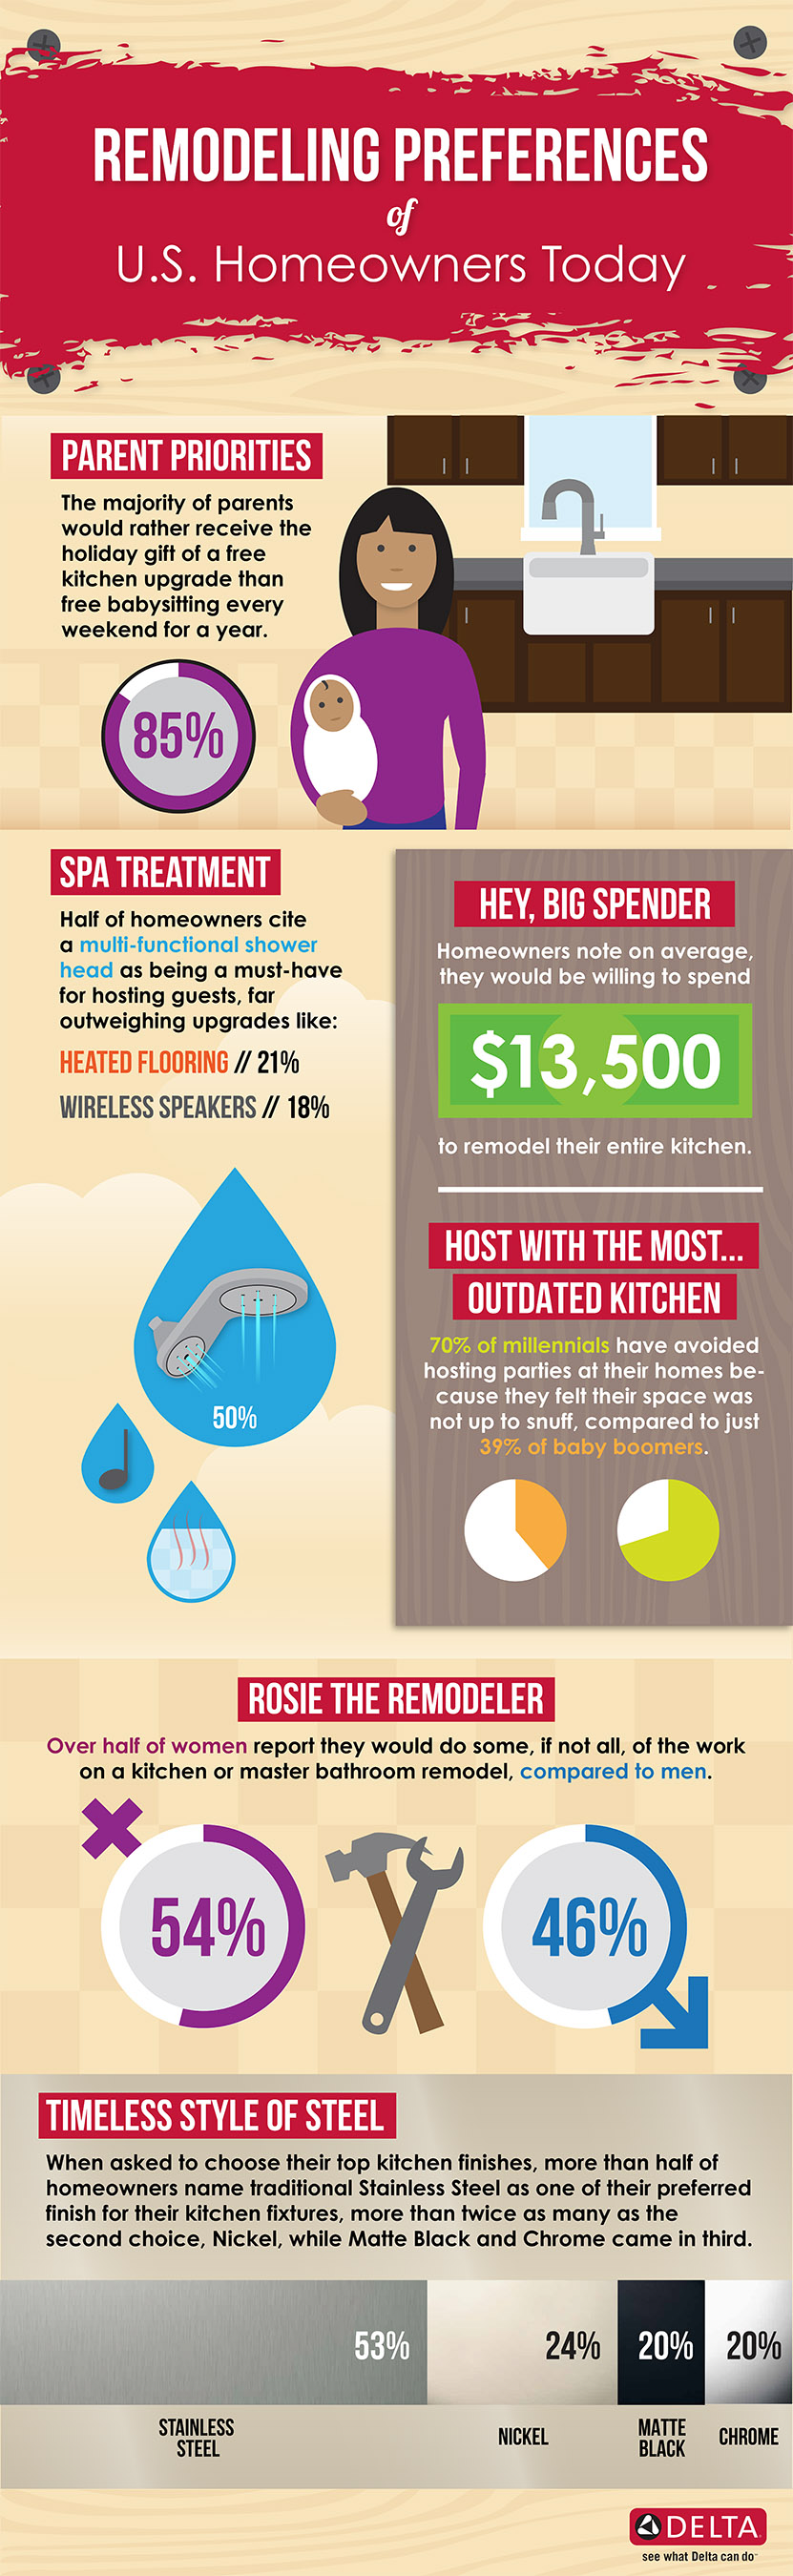 Remodeling Preferences of U.S. Homeowners Today